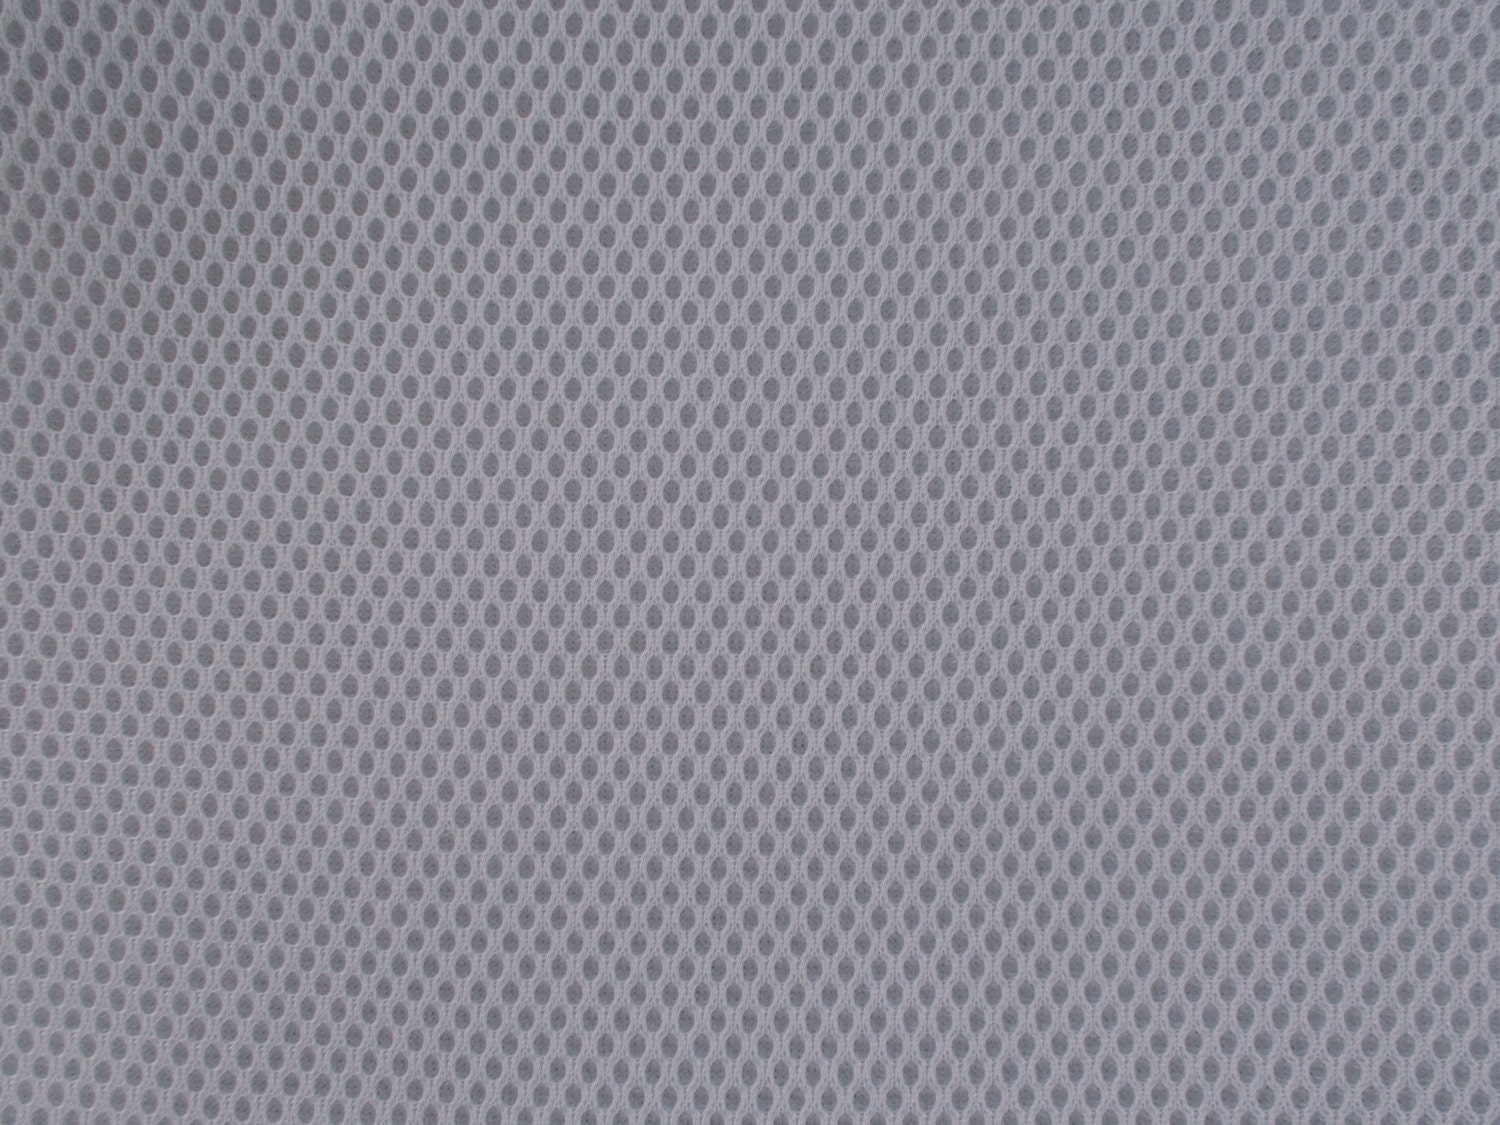 60 Wide Padded Mesh Fabric LIGHT GRAY SILVER Auto